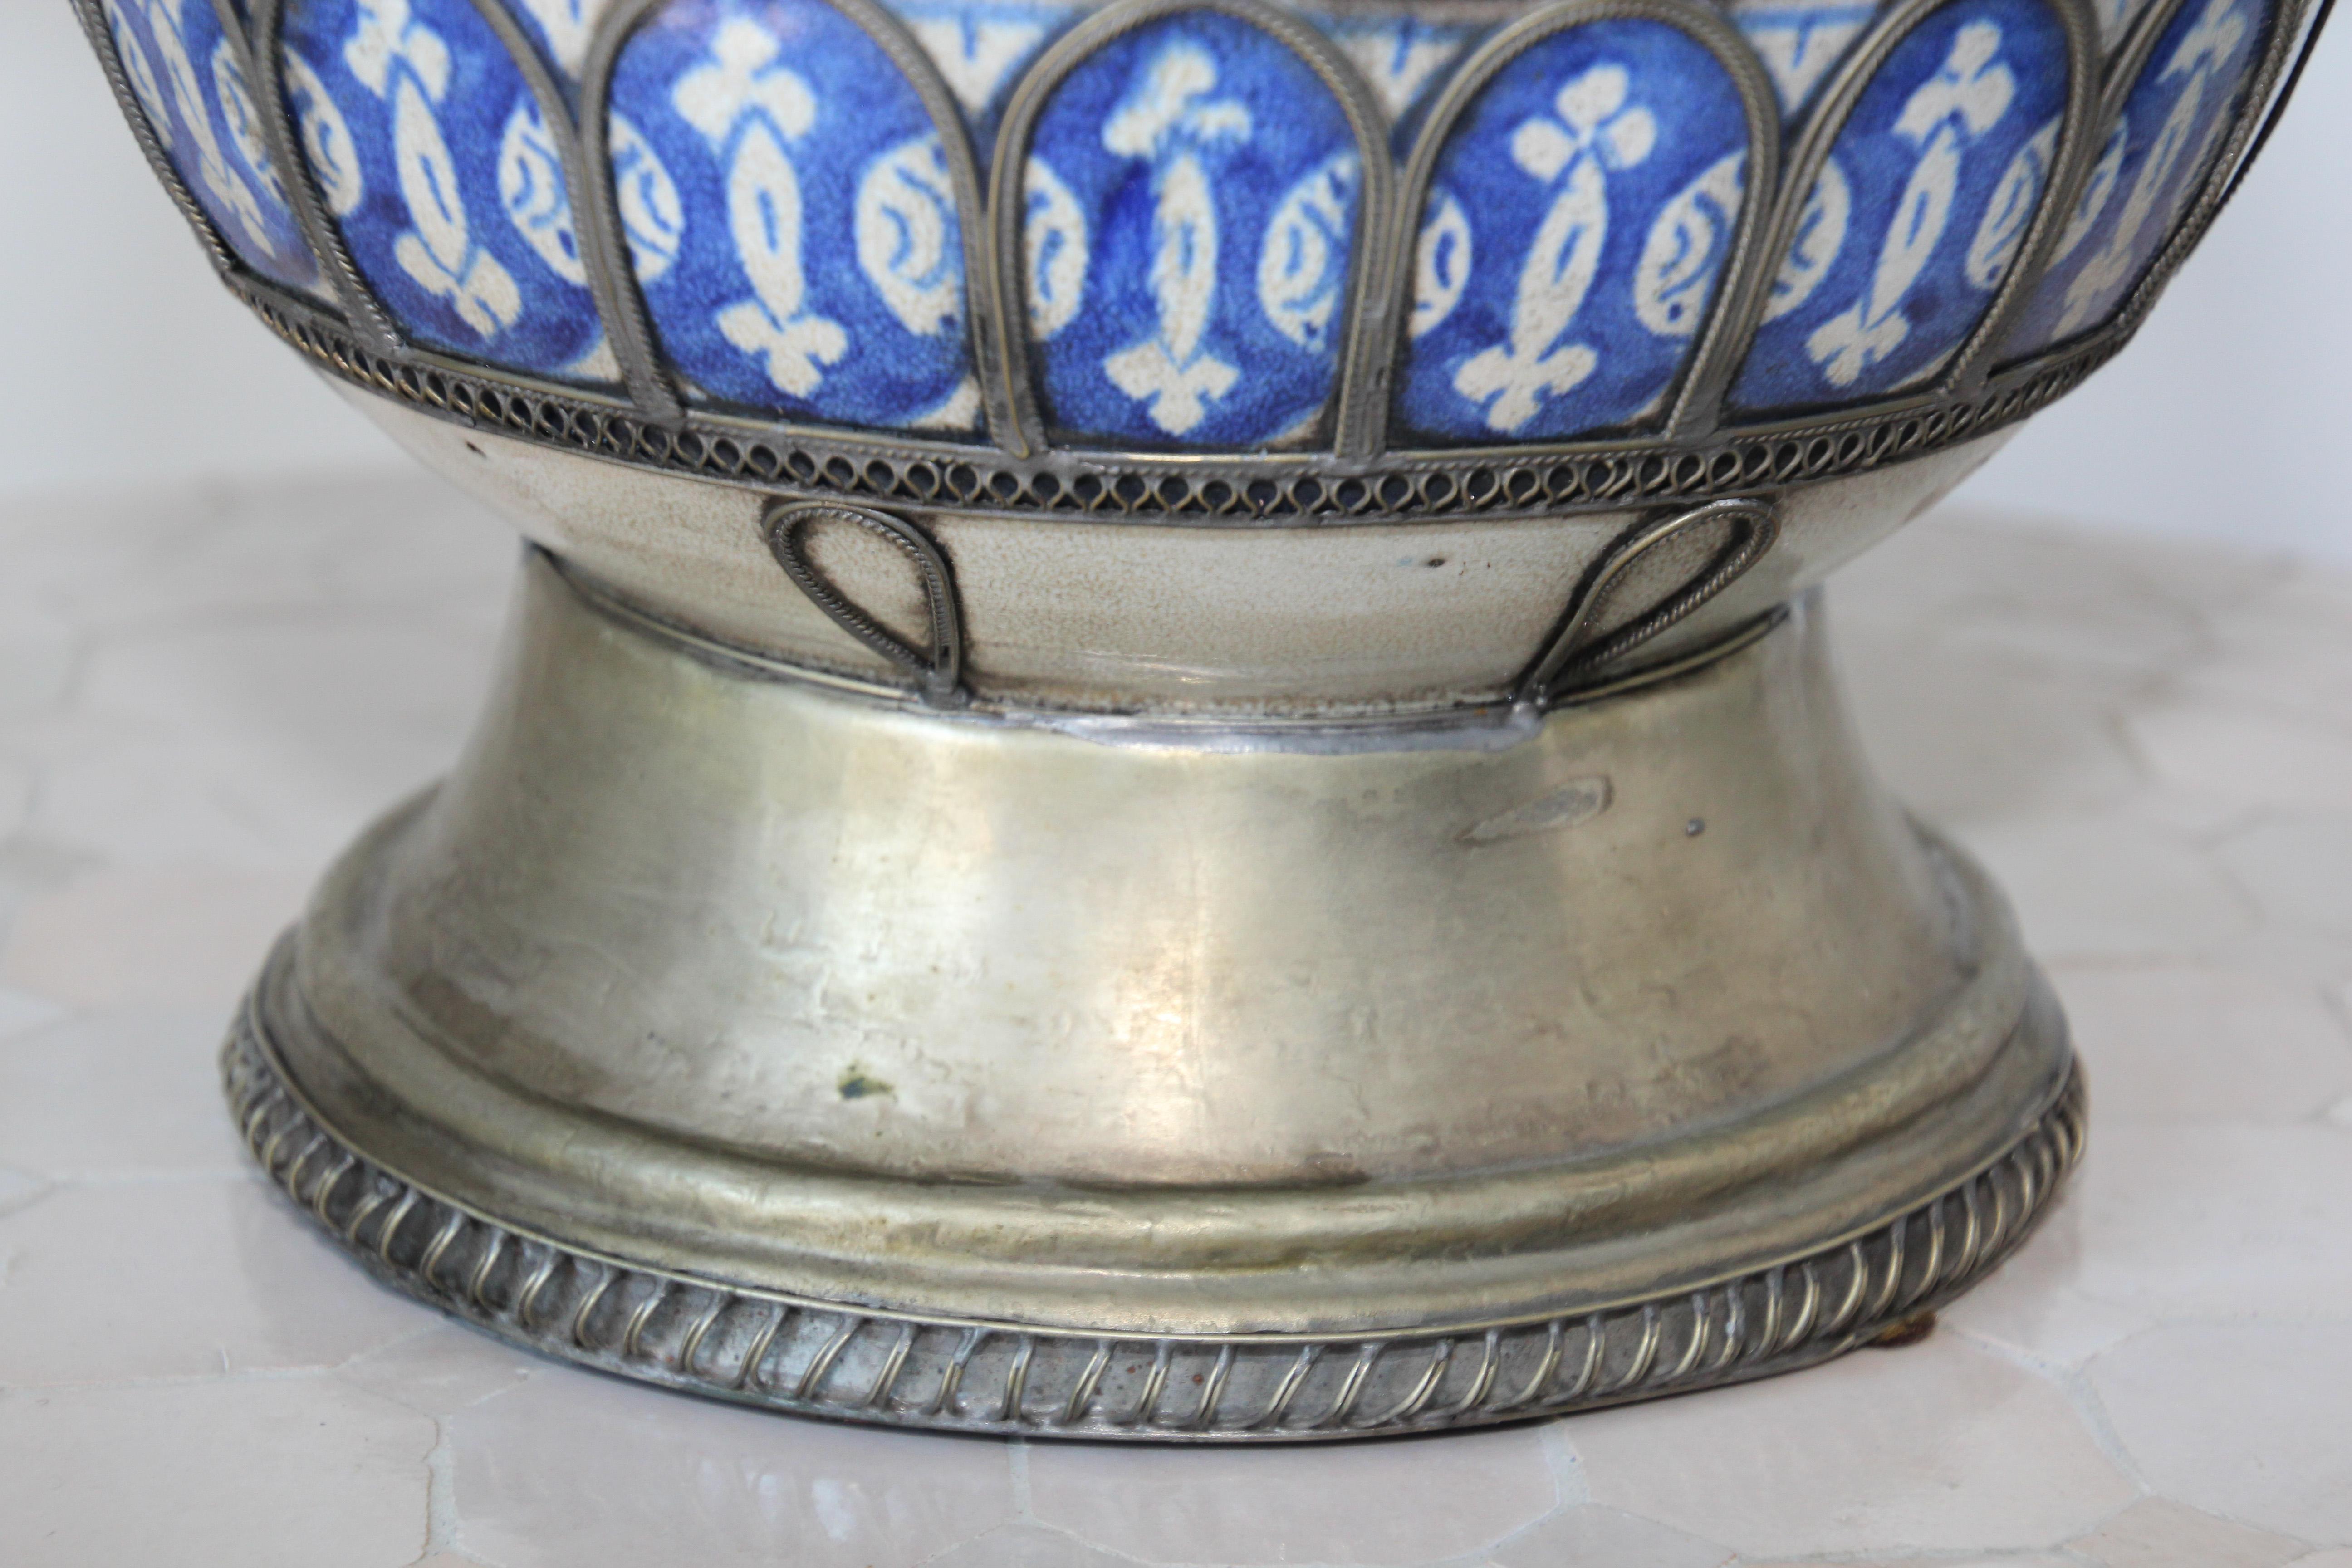  Moroccan Blue & White Ceramic Footed Vase from Fez with Silver Filigree For Sale 6